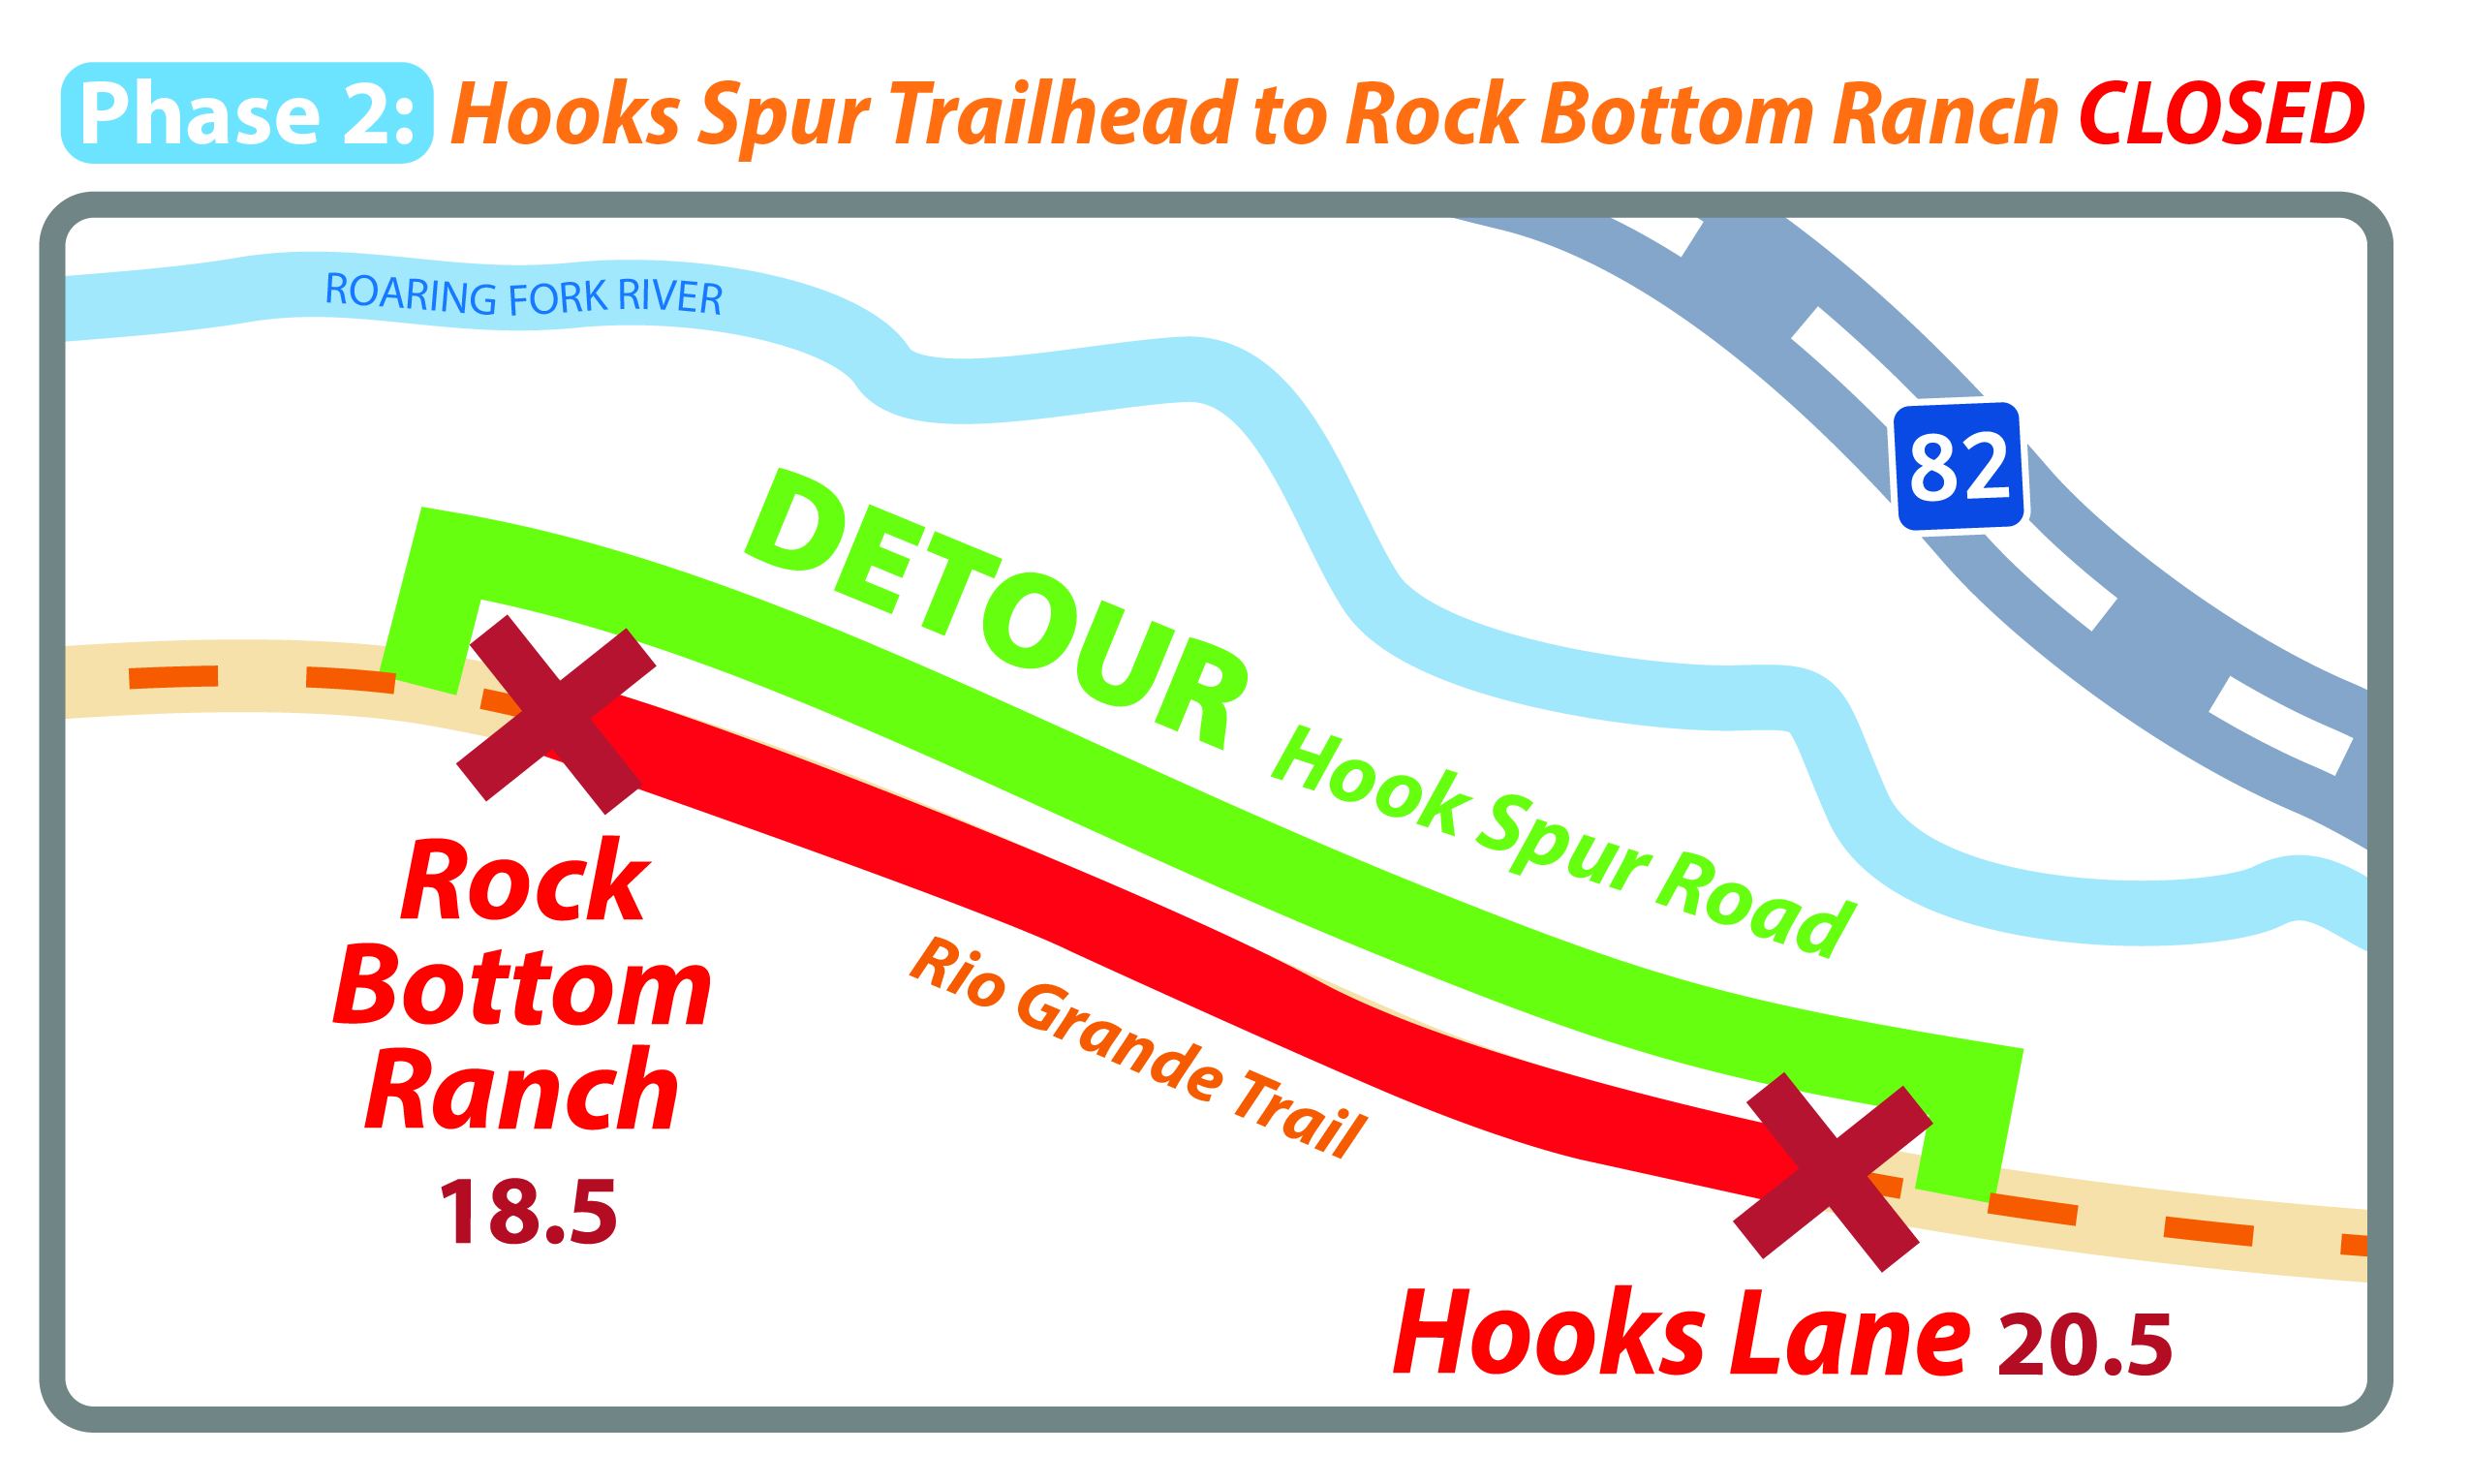 Illustration of map of phase two of the rio grande trail asphalt repair project showing closure from hooks lane to rock bottom ranch. Detour is hooks spur road.